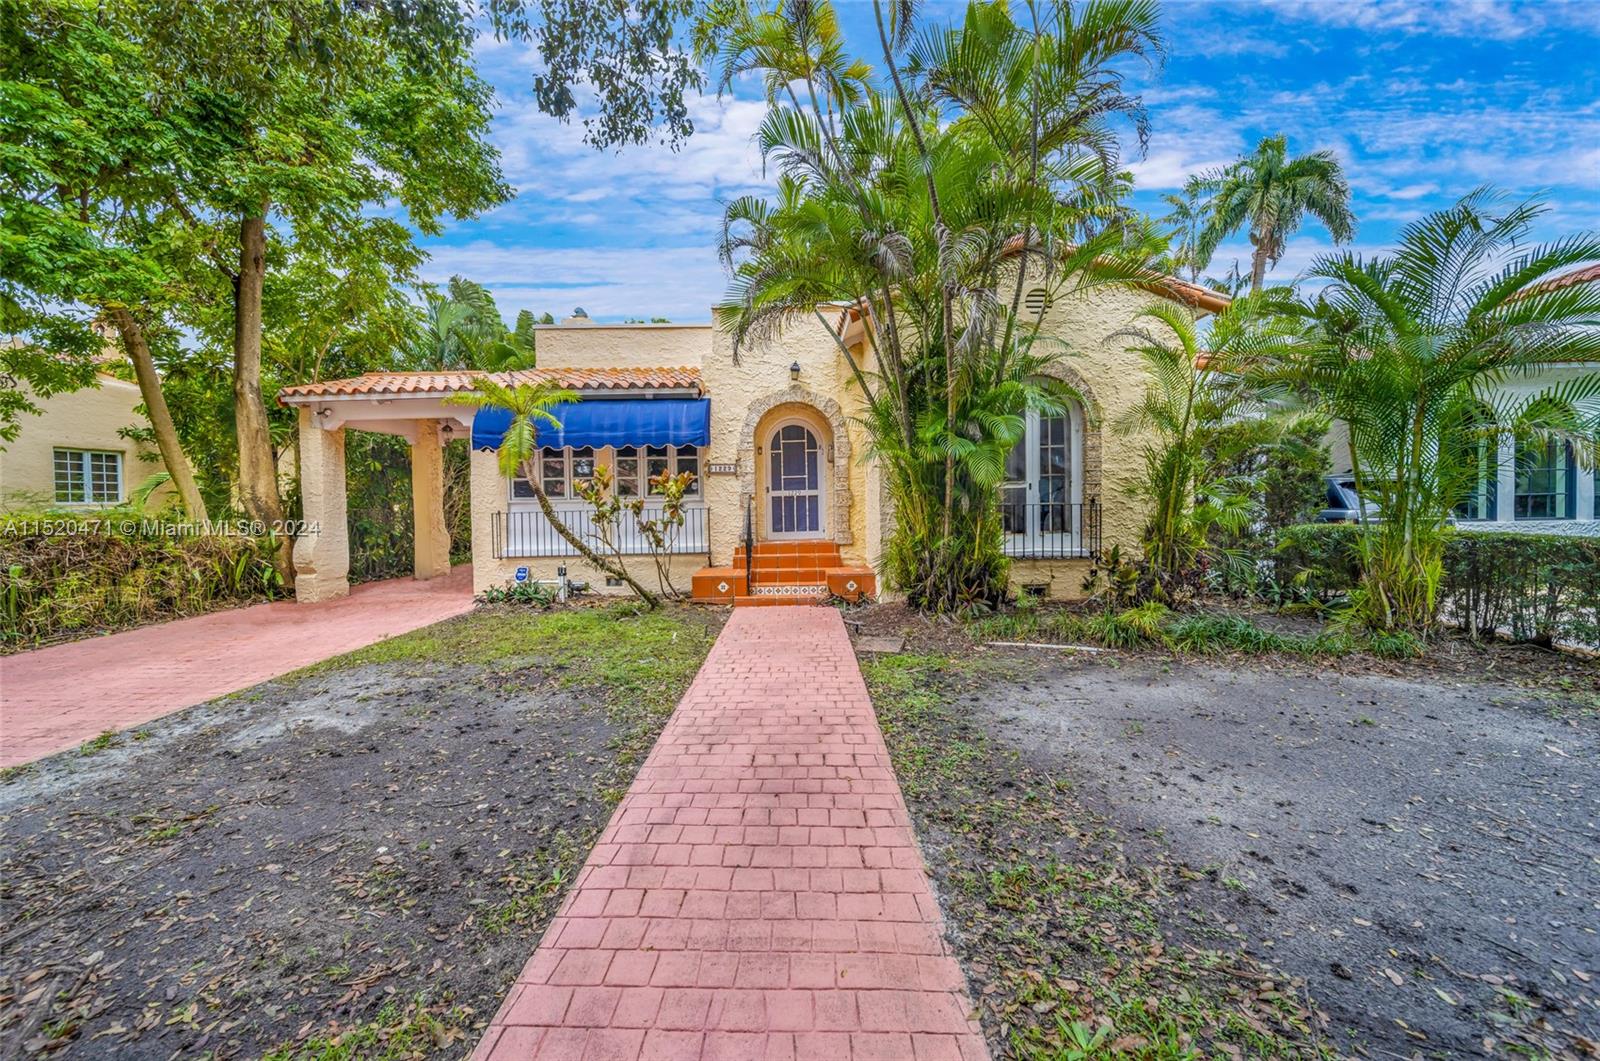 Uncover potential in this 3-bed, 2-bath single-family gem + 1 Bed / 1 Bath Guest House in the heart of Coral Gables. This historic home features 1,602 sq/ft in the main residence and 620 sq/ft in the Guest House. Situated on a 7,500 sq/ft lot, envision the possibilities to craft your dream home in this coveted location. Embrace the chance to reimagine and revitalize every corner. This canvas awaits your creative touch to restore it into a personalized sanctuary. Centrally located near all the shops, restaurants, major roads and highways. Don't miss out on this amazing opportunity to own a piece of history. PLEASE CLICK ON SHOWING TIME FOR SHOWING INSTRUCTIONS. MULTIPLE OFFERS RECEIVED. OFFERS ARE DUE BY 5-1-24 AT 10AM.